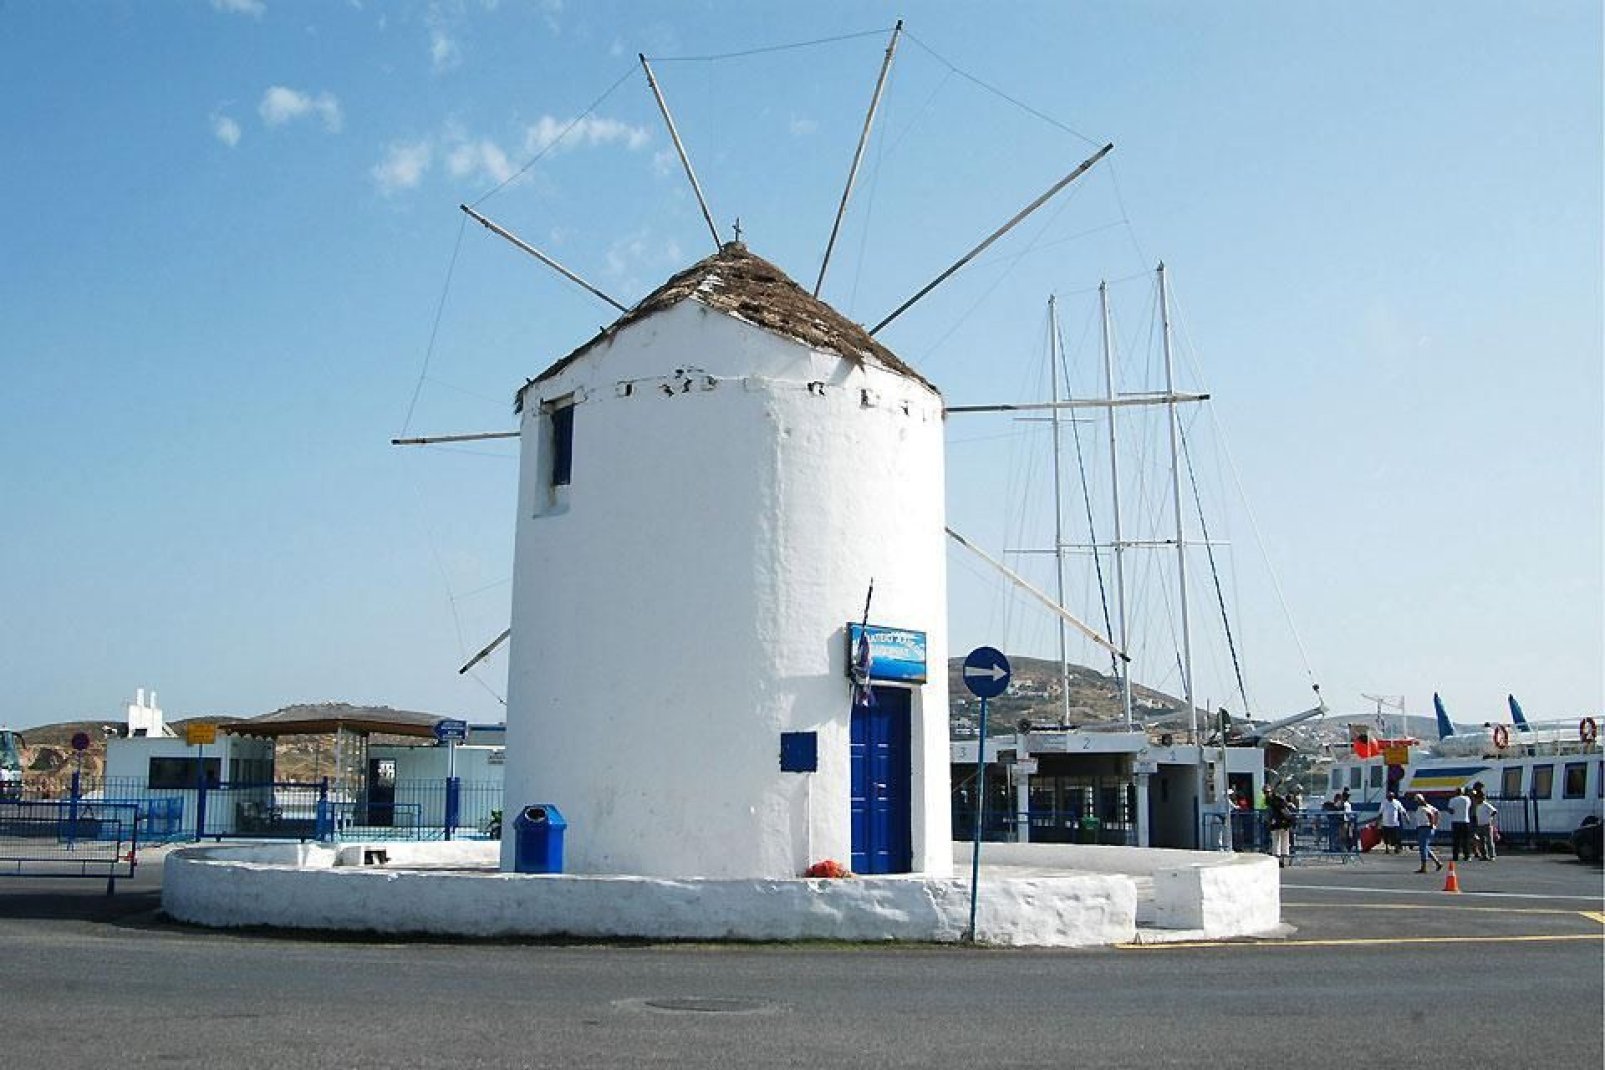 Like all of the island's in the region, Paros has its famous windmills, typical of the Cyclades region.